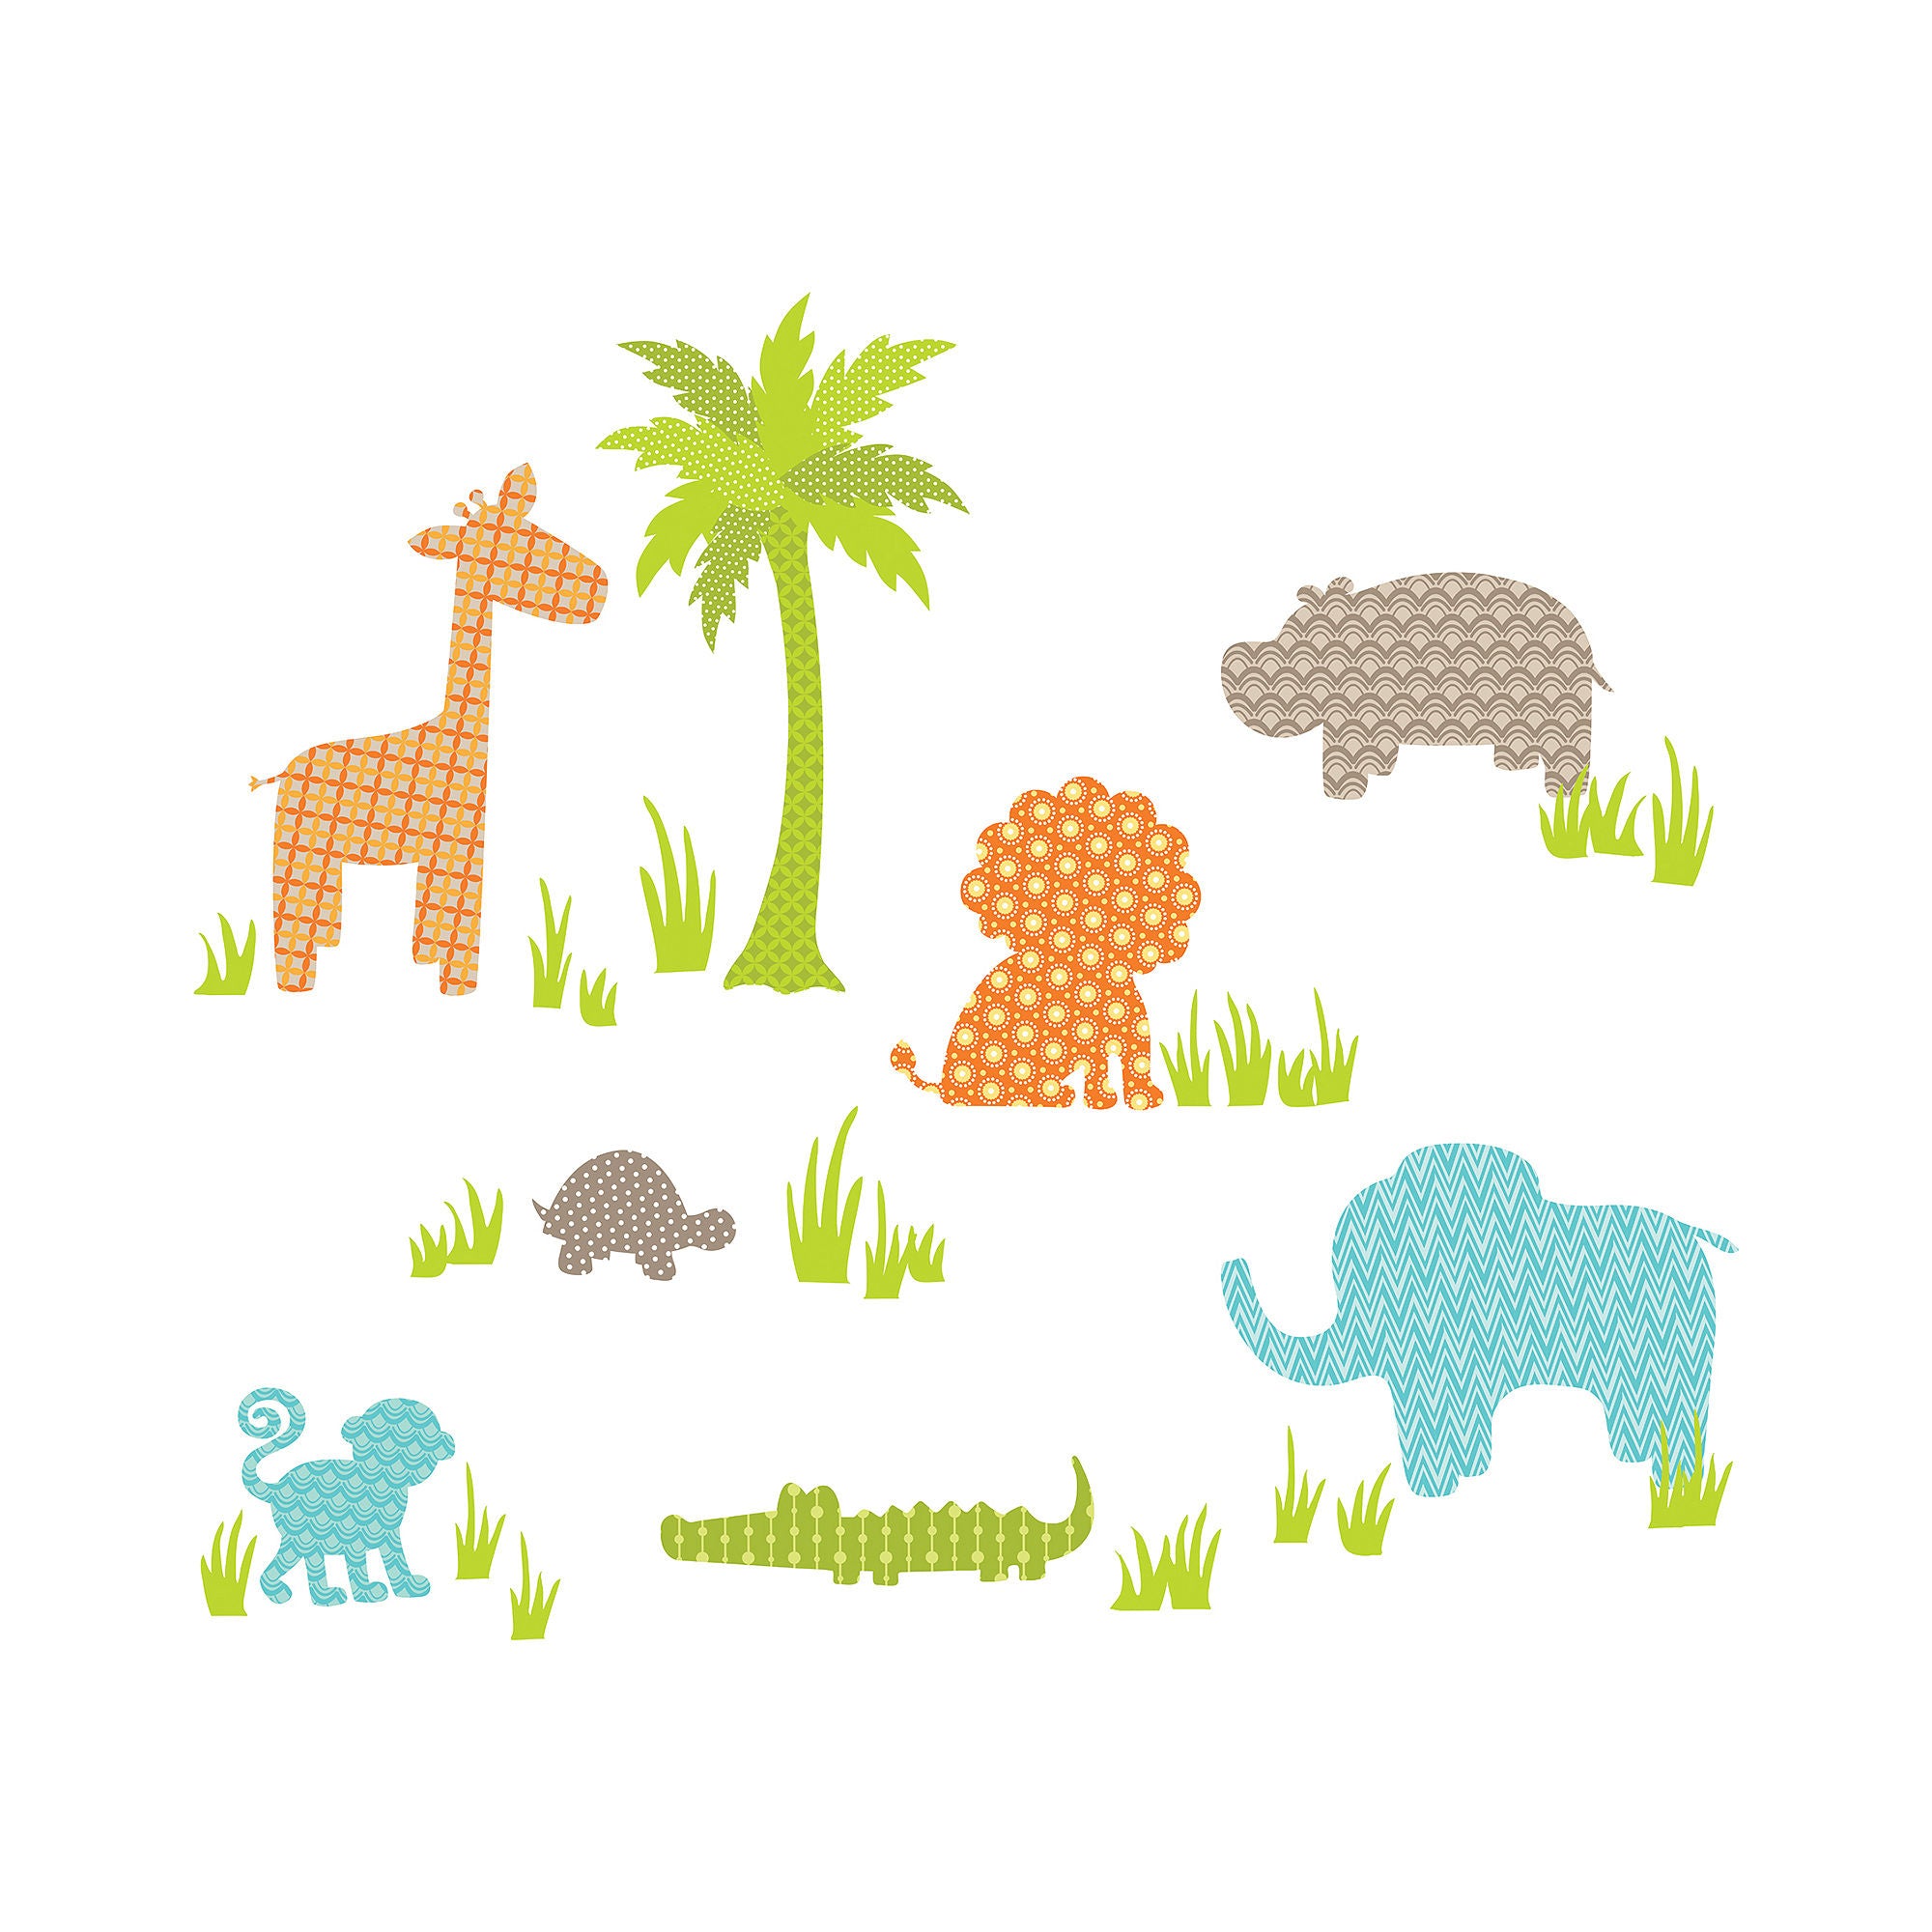 WallPops! Jungle Friends Kit Wall Decals - image 2 of 3